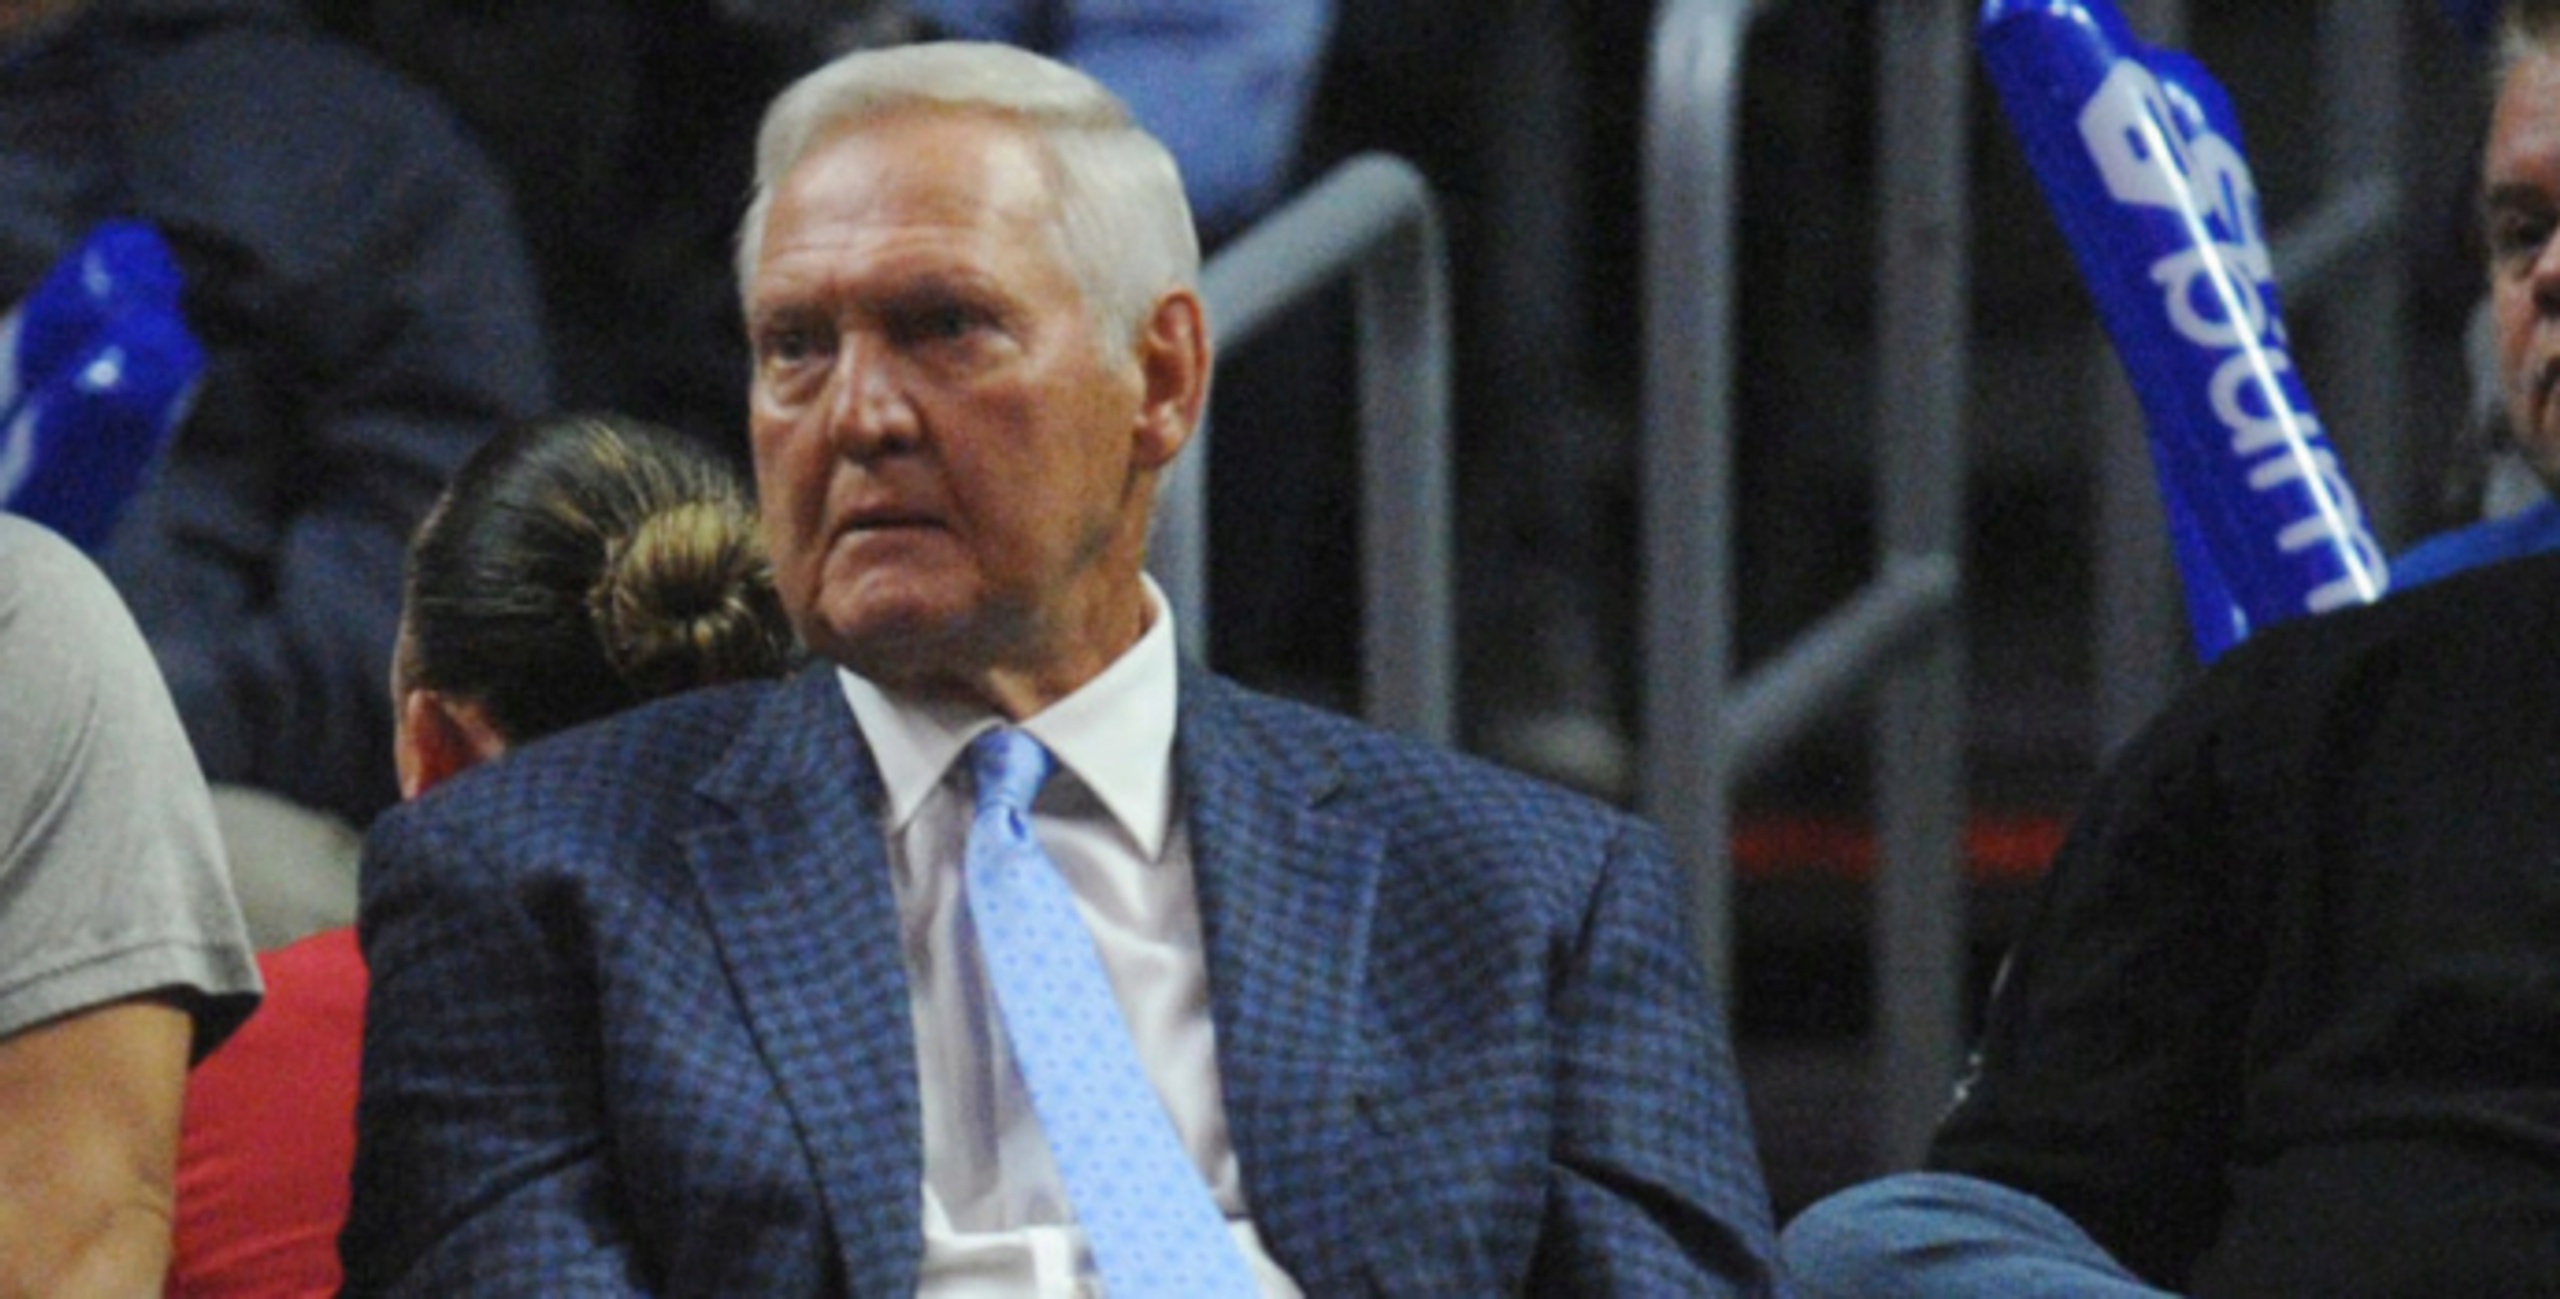 Jerry West on being NBA logo: 'I don’t think that’s right or fair'